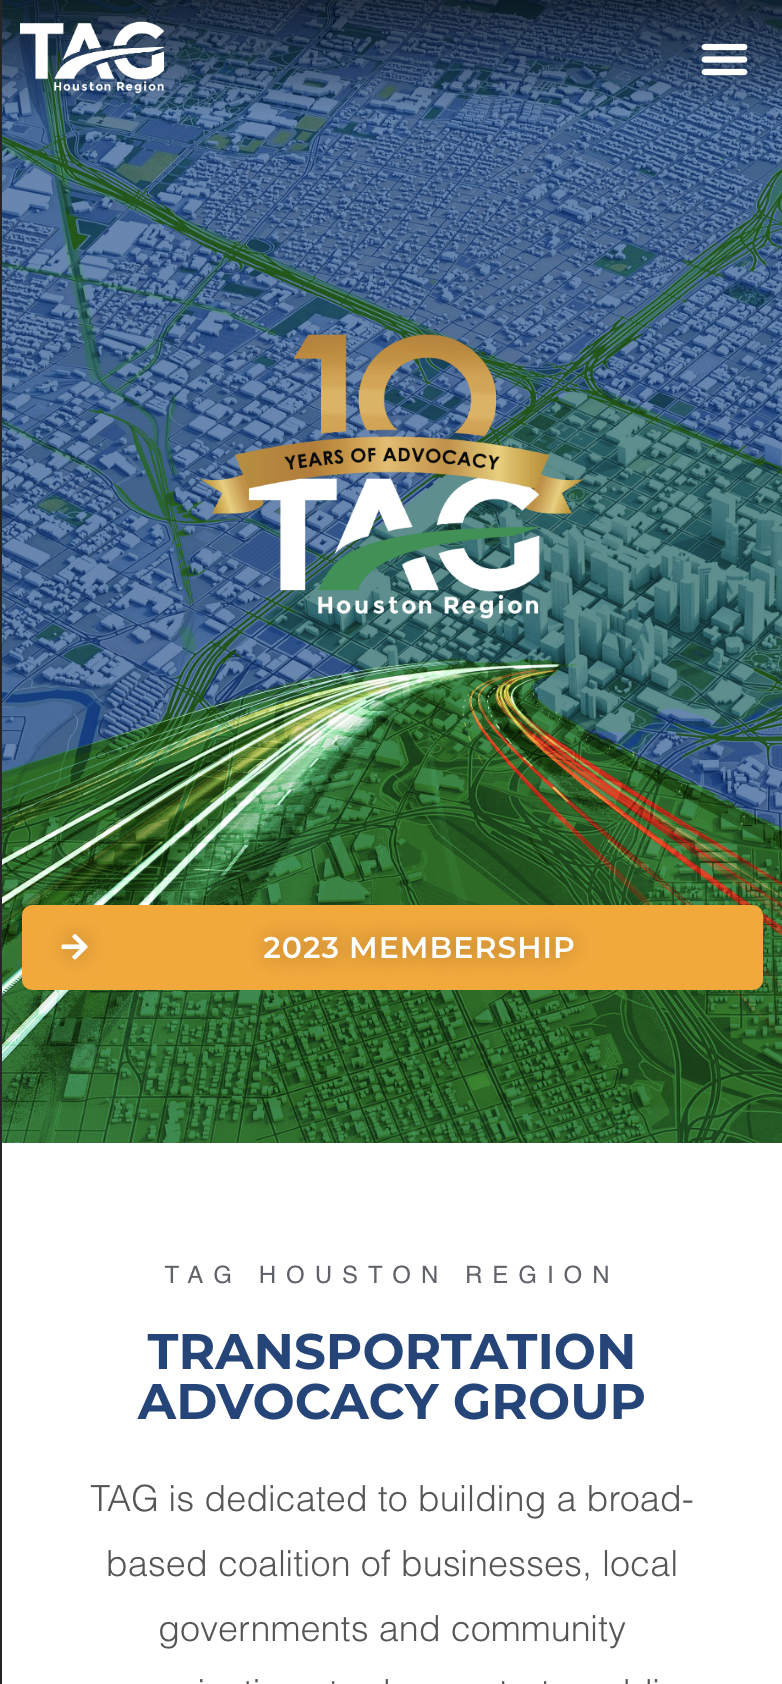 TAG is dedicated to building a broad-based coalition of businesses, local governments and community organizations to demonstrate public support for full and adequate funding of transportation infrastructure by the local, state and federal governments.